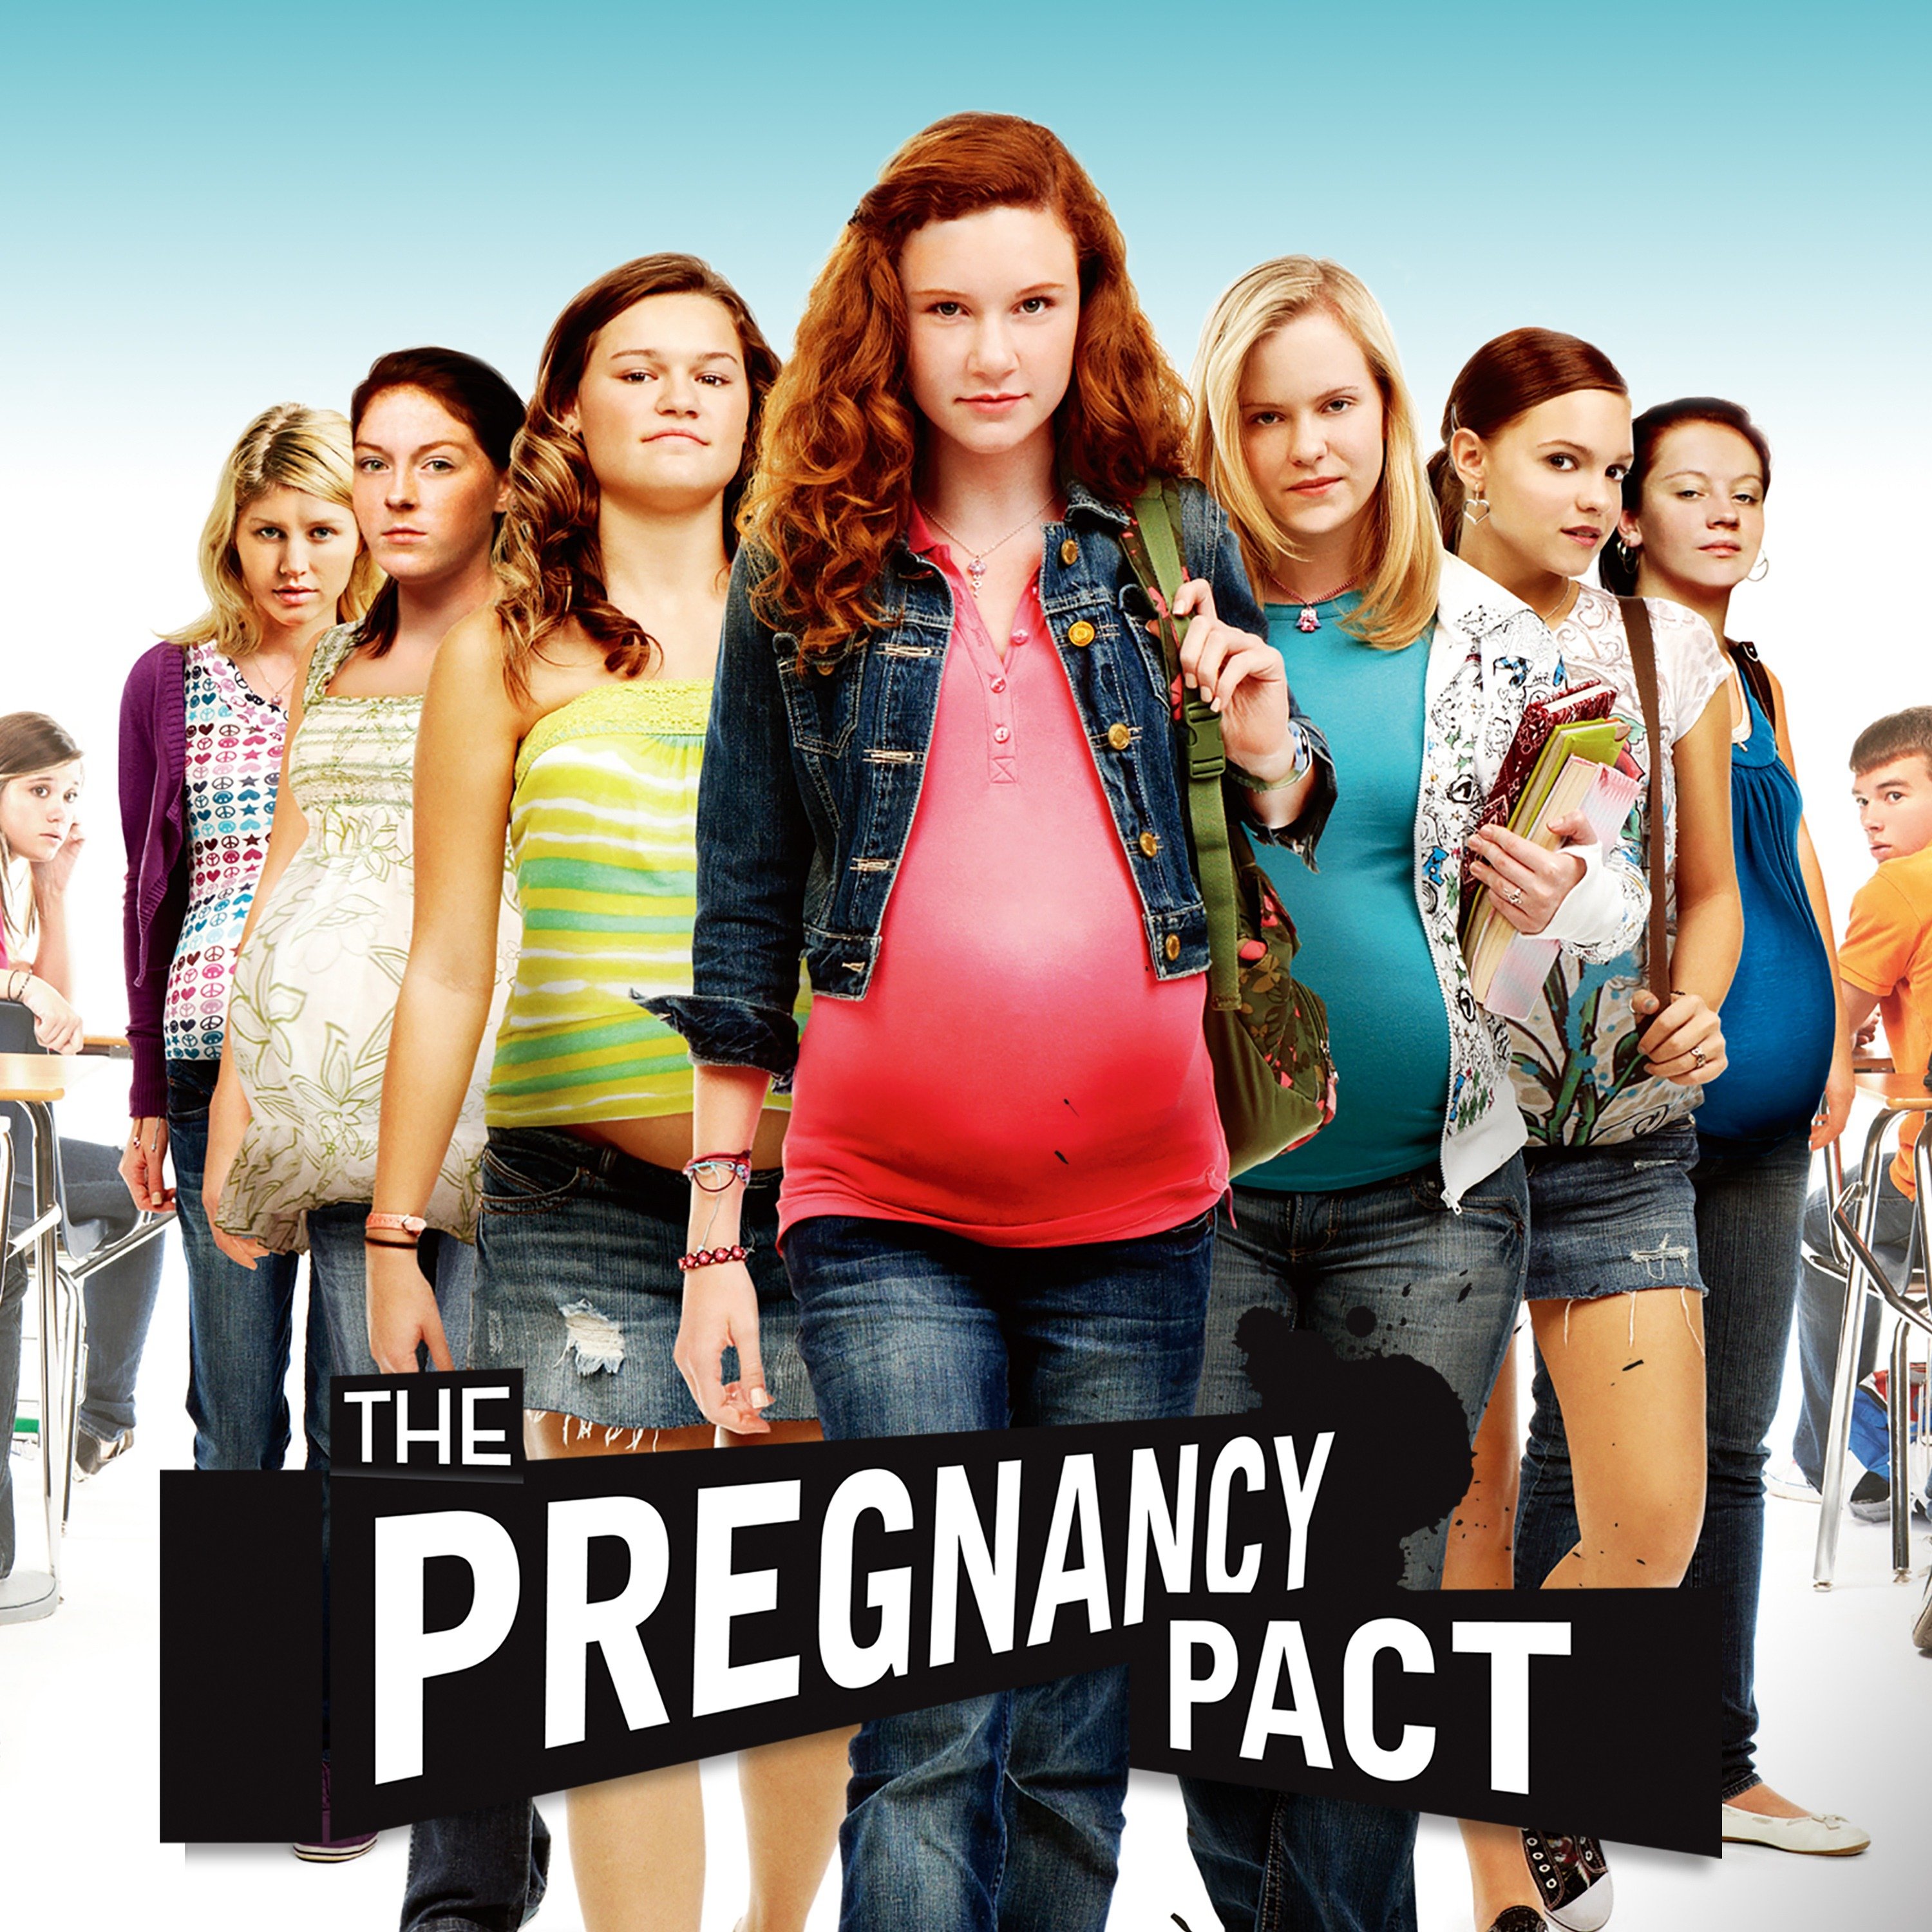 brennen cox recommends Pregnancy Pact Full Movie